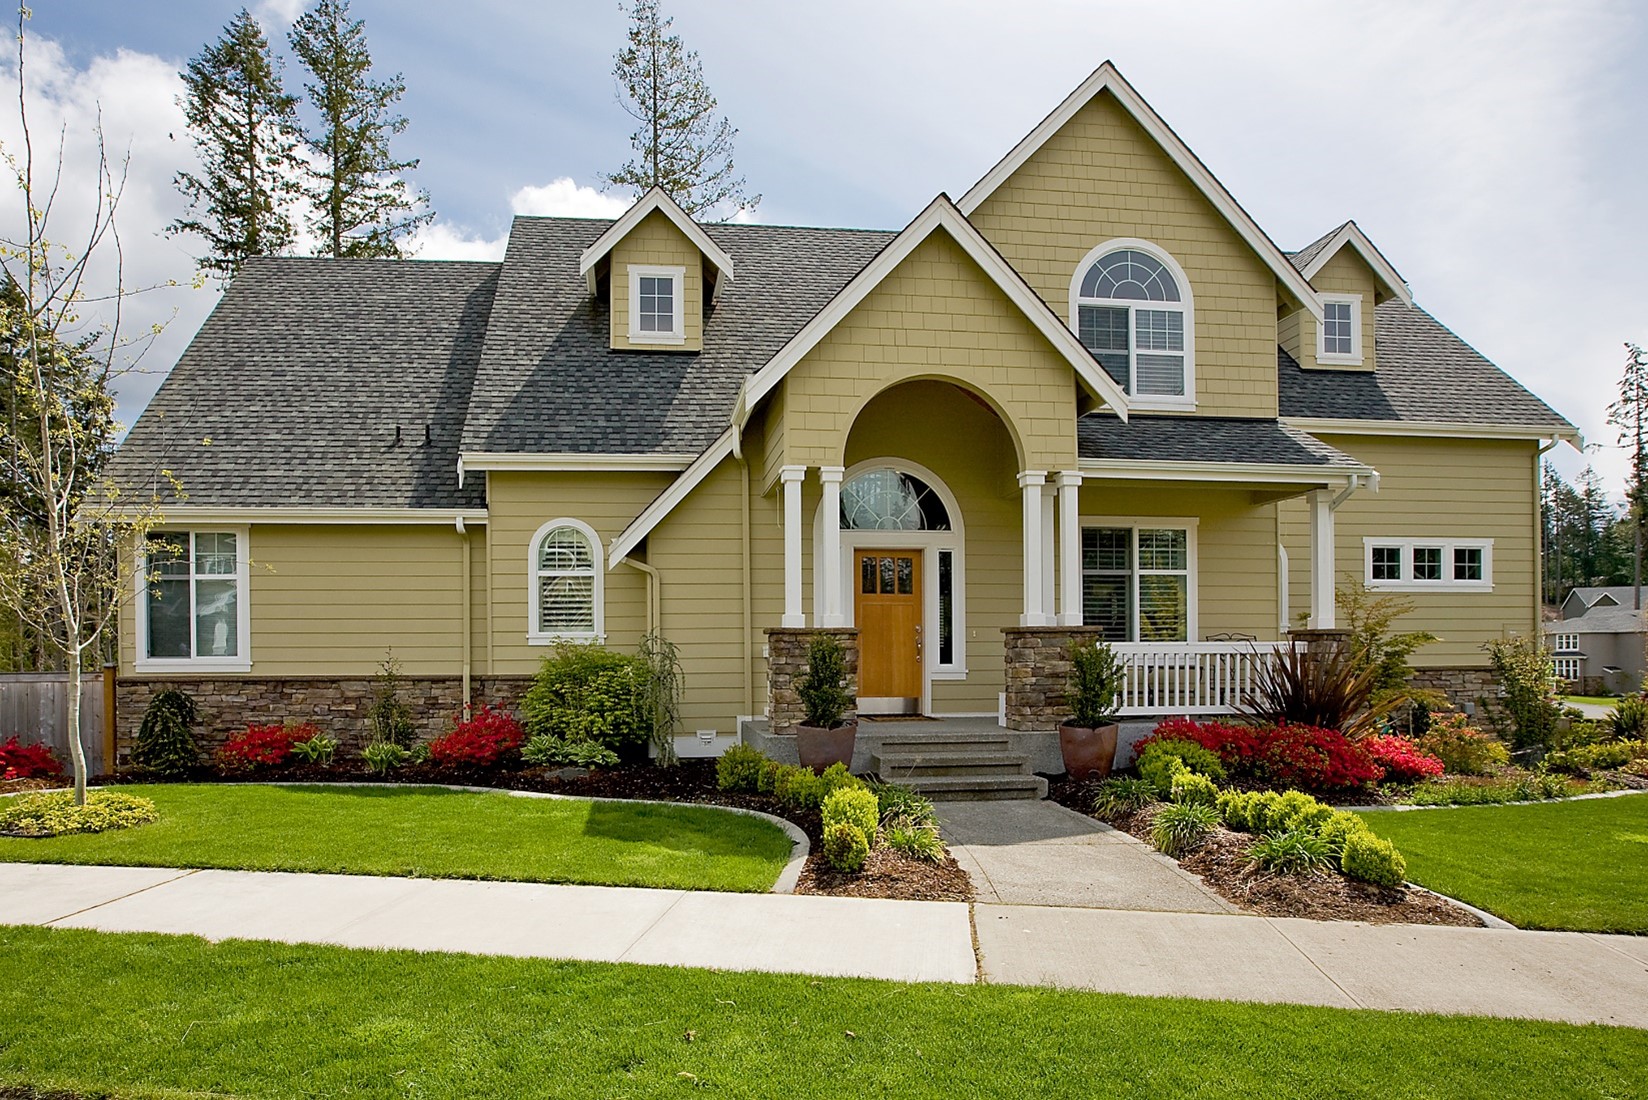 A picture-perfect ochre colored home with a pointed roof surrounded by a green, neat lawn.